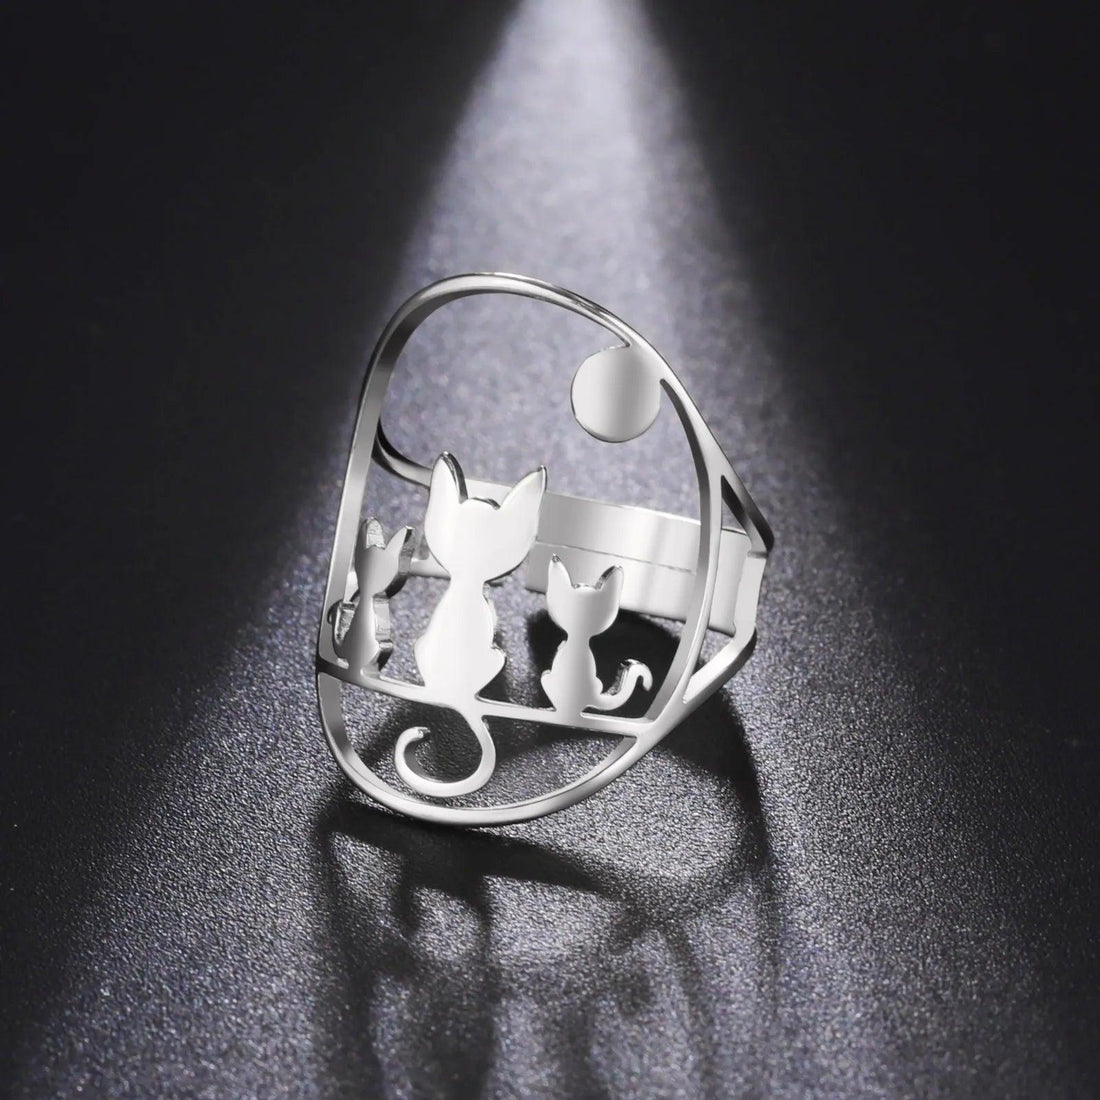 Stainless Steel Ring 2 or 3 cats, Adjustable - Just Cats - Gifts for Cat Lovers